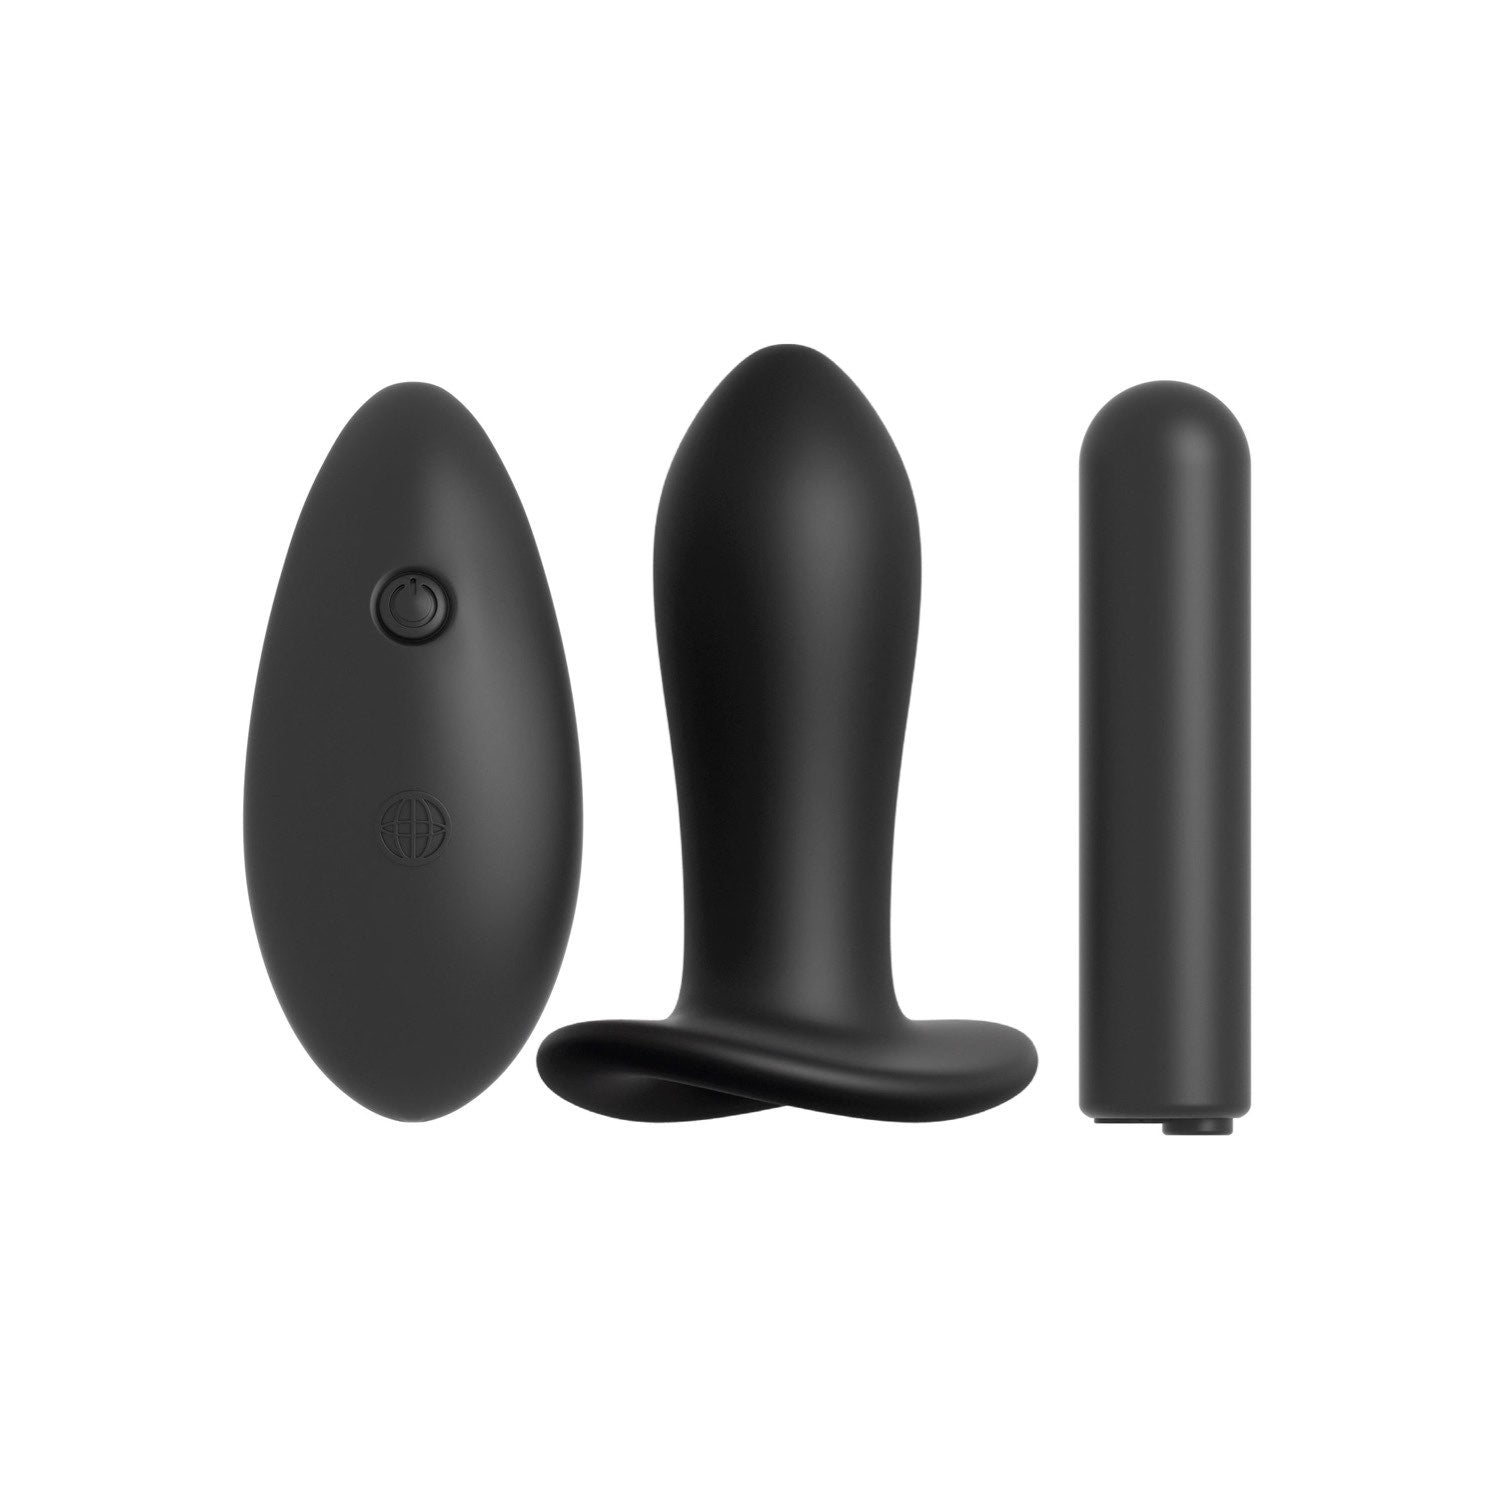 Fetish Fantasy Series 20-function Remote Fantasy Panty - Black Vibrating Thong by Pipedream